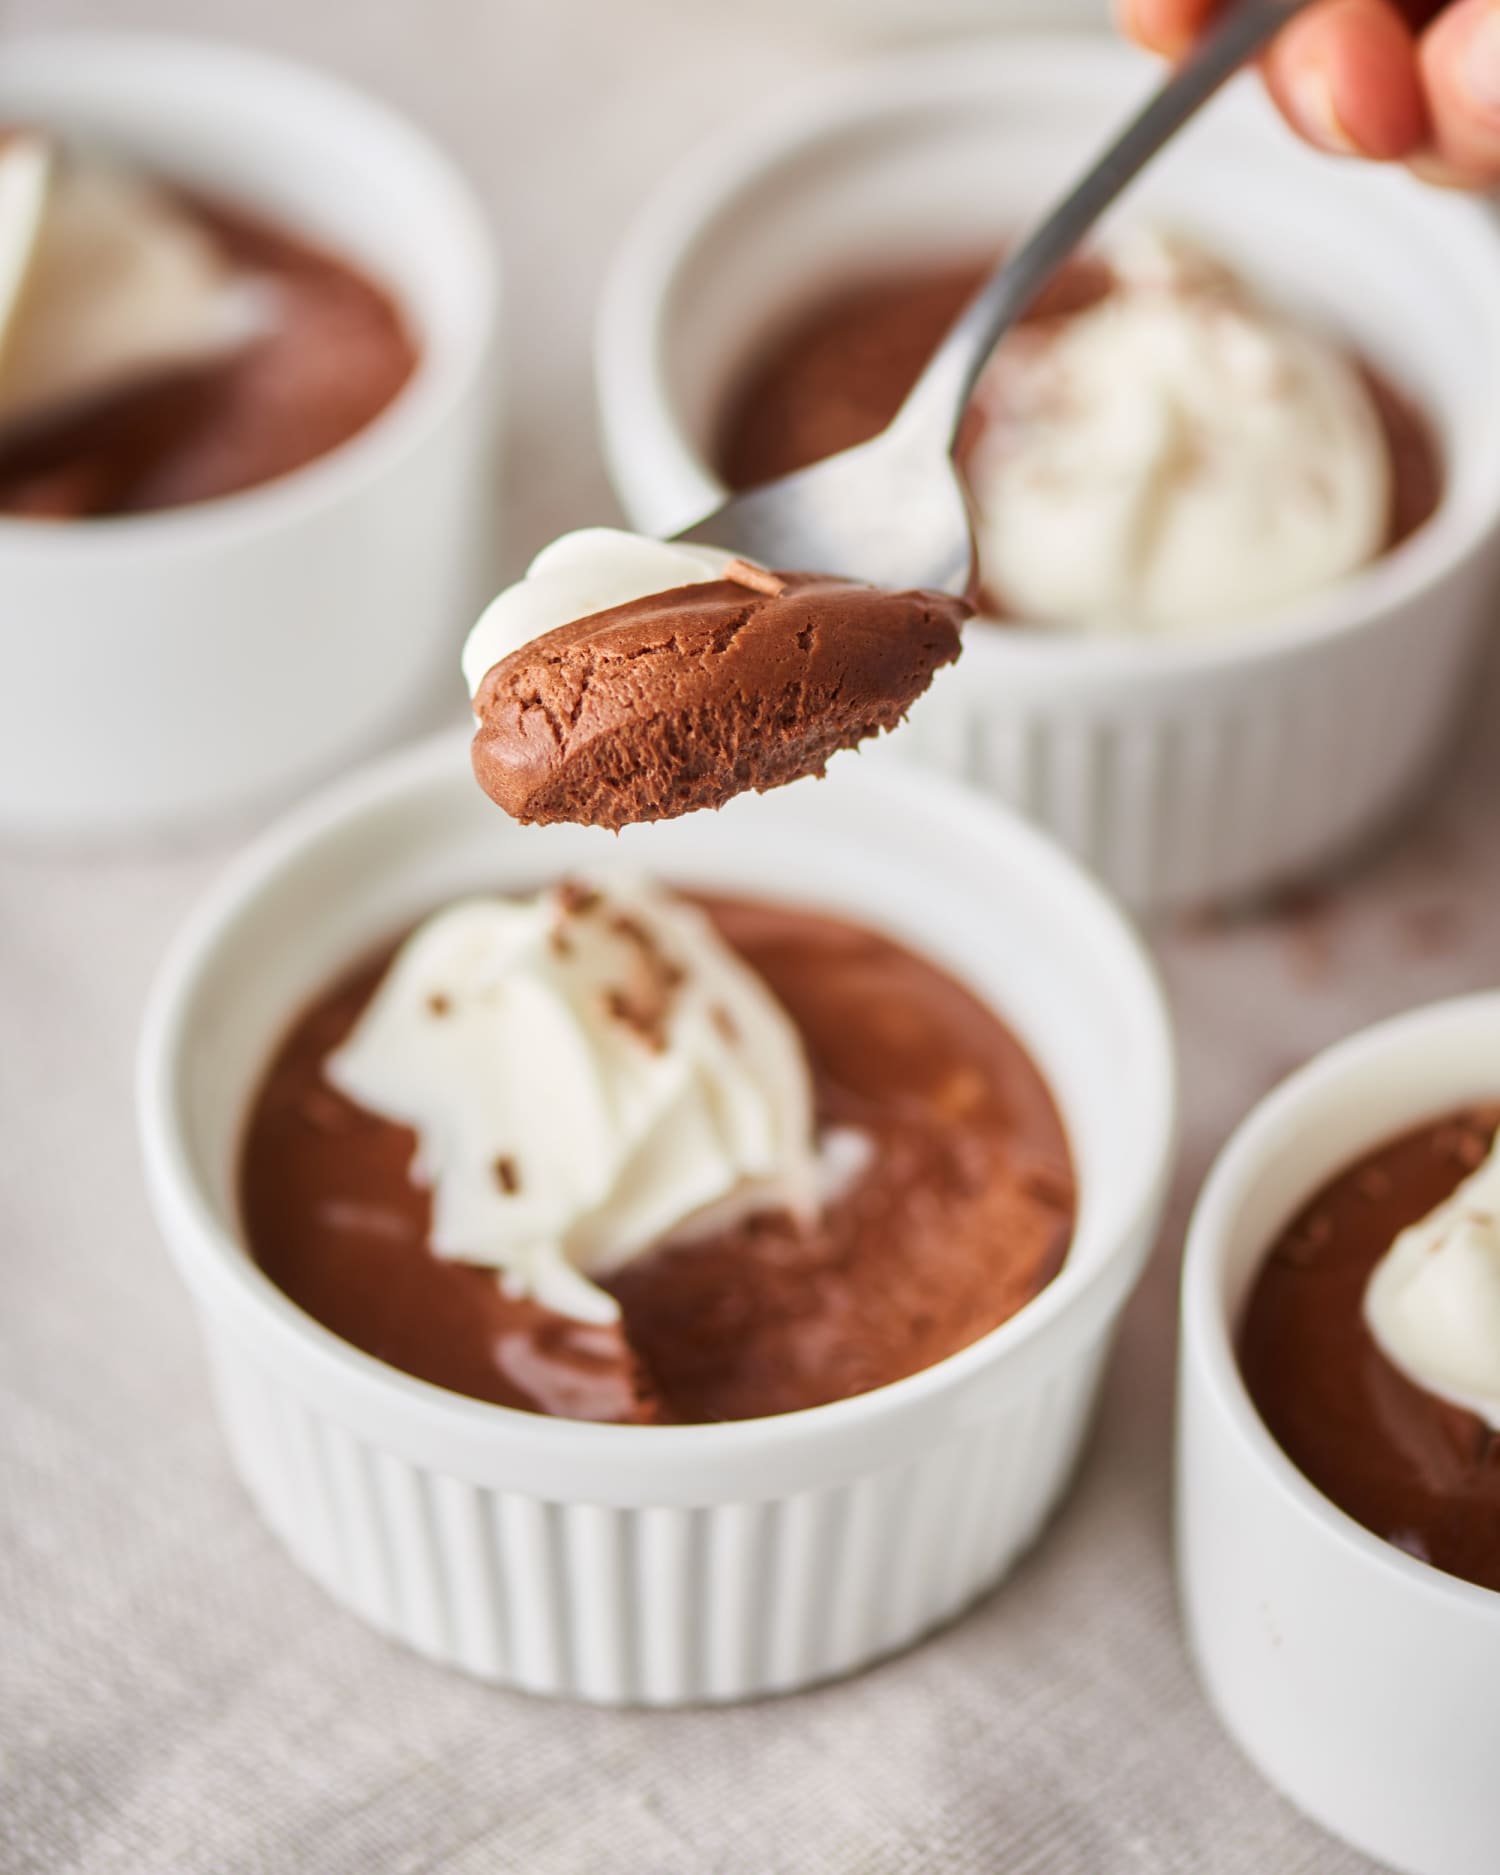 50+ of the Most Romantic Chocolate Recipes